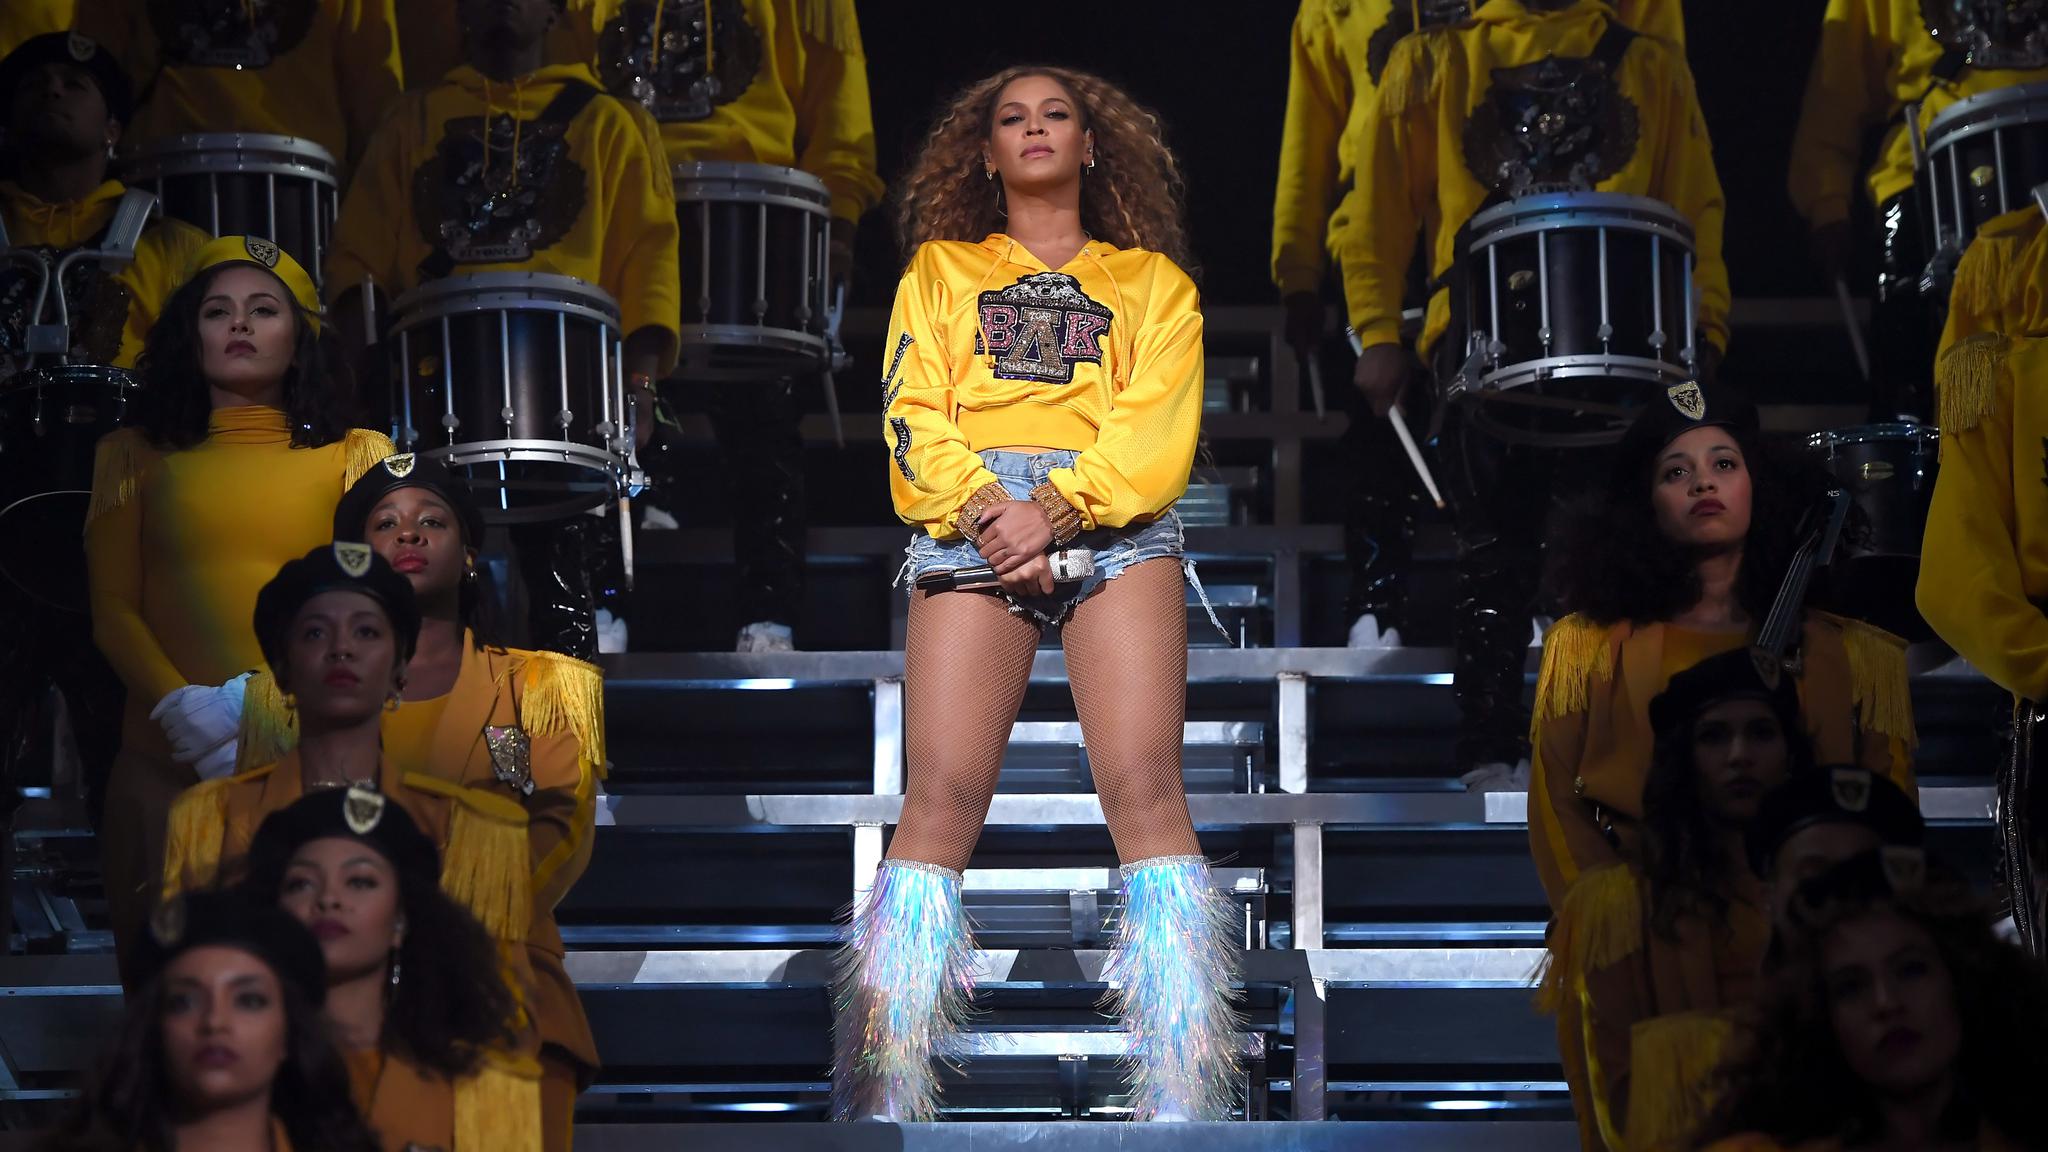 Beyoncé performs at the 2018 Coachella Valley Music and Arts Festival in Indio, California, on Saturday, April 21, 2018. - Beyonce